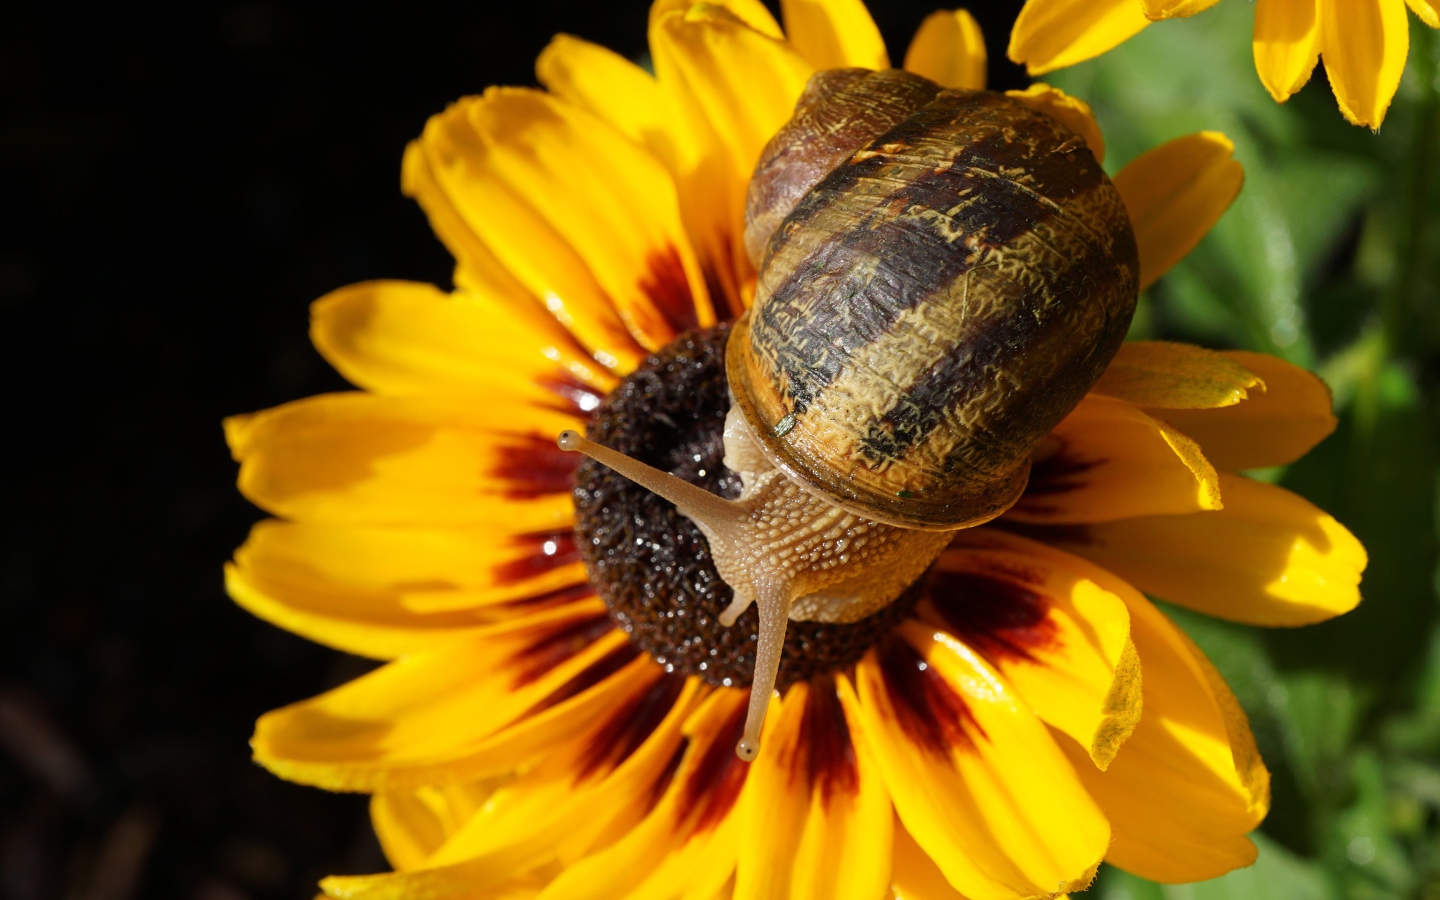 Snail sitting on a yellow flower